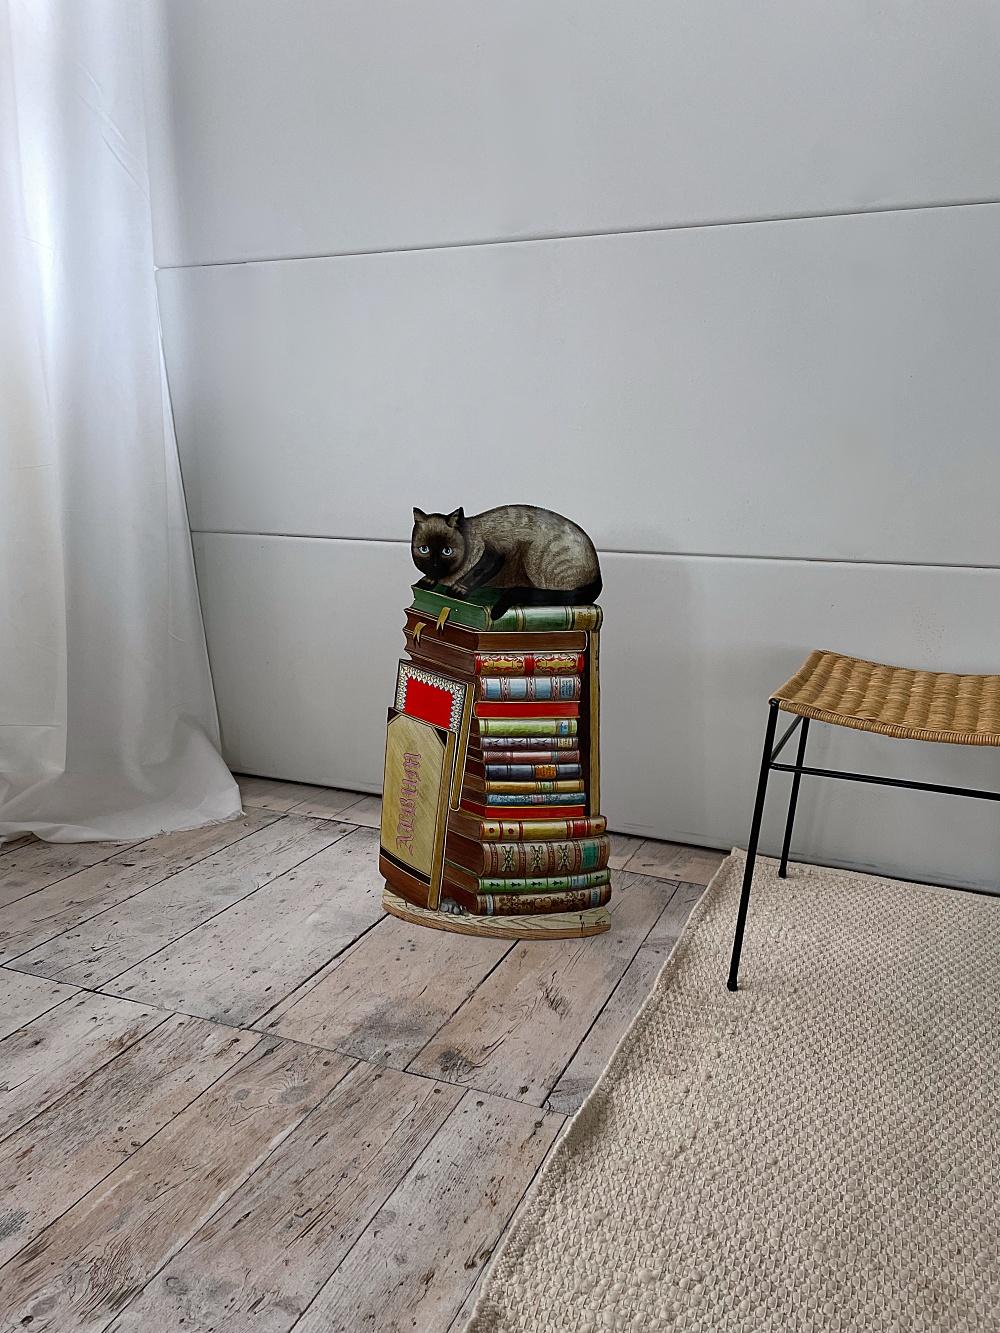 Piero Fornasetti 'Gatto Siamese su Libri' 
Hand painted umbrella stand by Fornasetti, made in Italy in 1997. This stand is numbered N°6 / 97 E.S. Paper label to the rear. Very good original condition with the original green water pot.

We ship